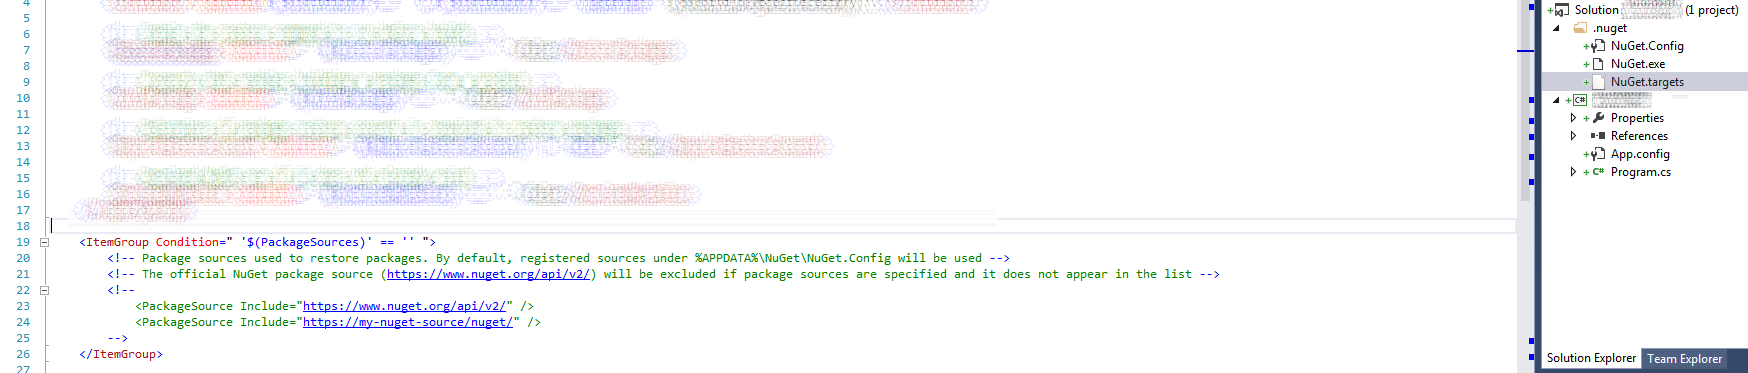 Contents of the Nuget.targets file